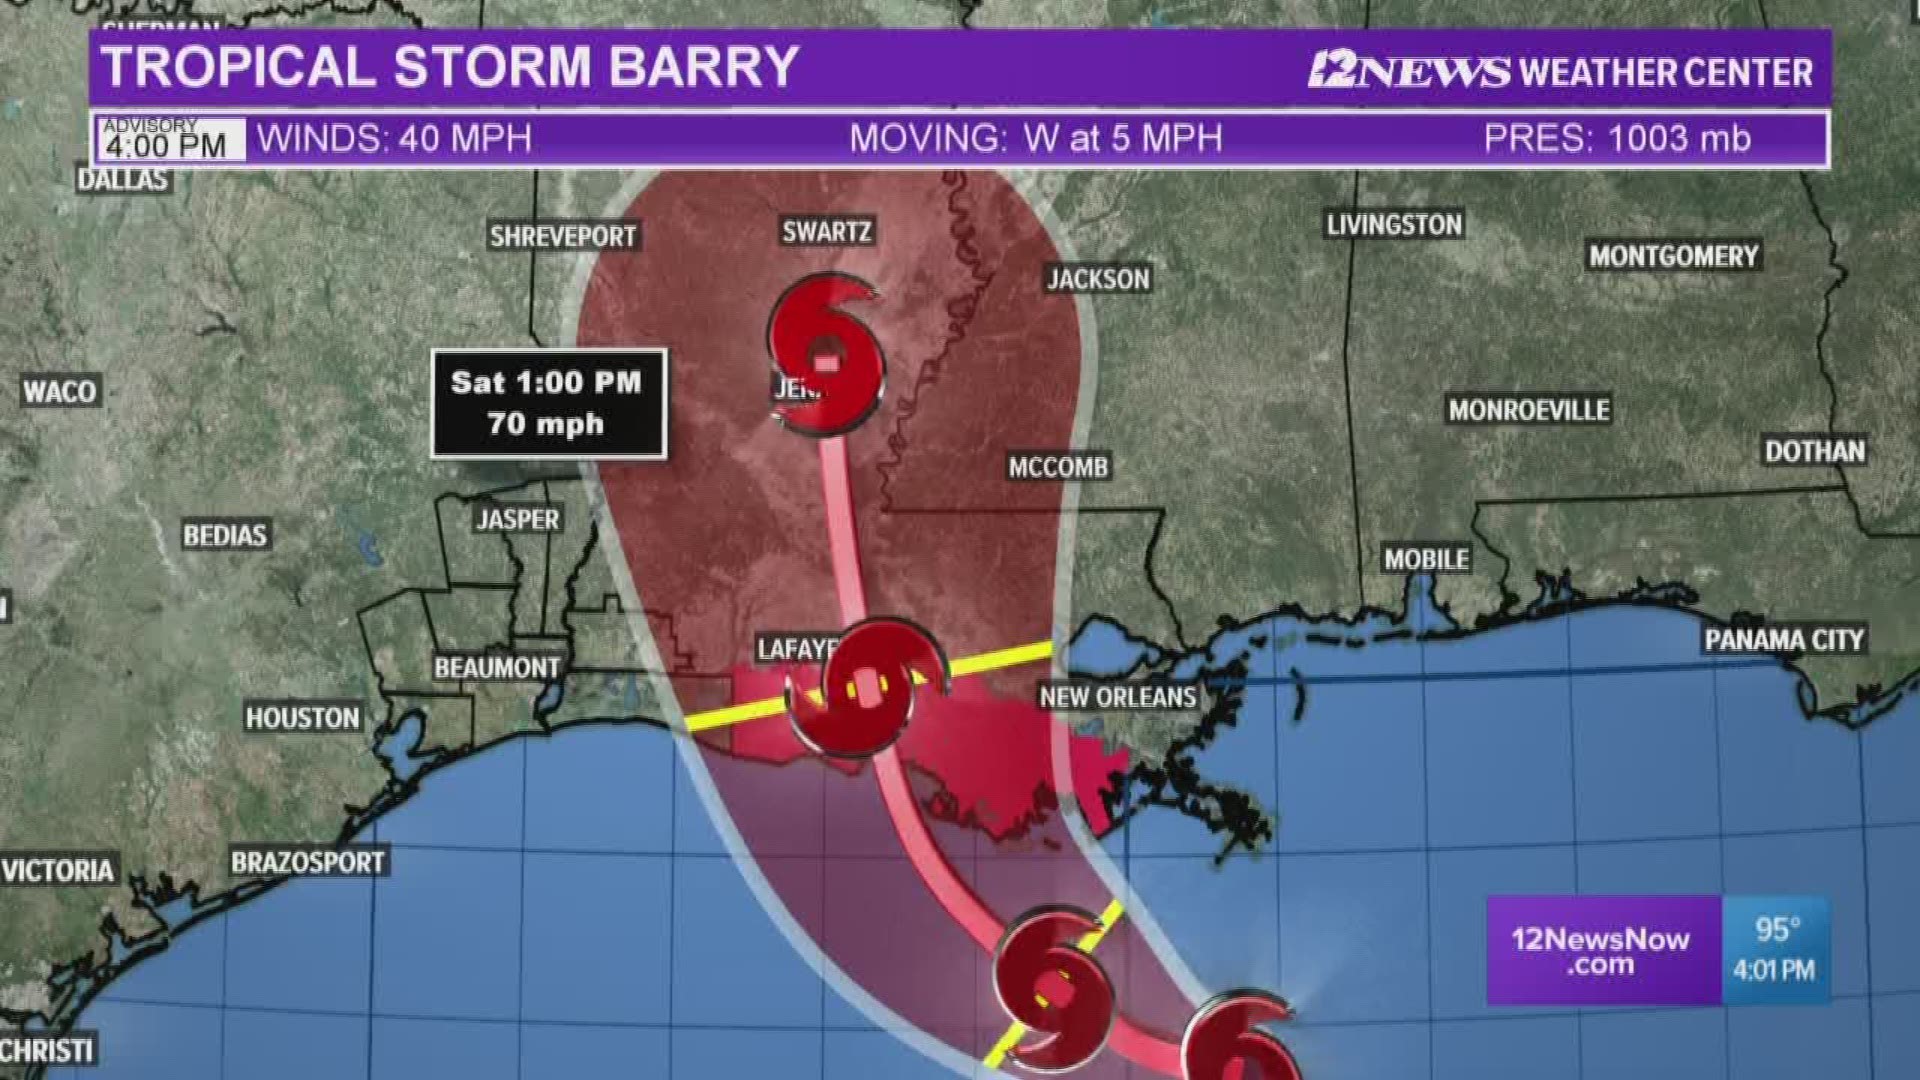 Southeast Texas is now out of the cone of uncertainty but Louisiana is expected to get the worst of Tropical Storm Barry.